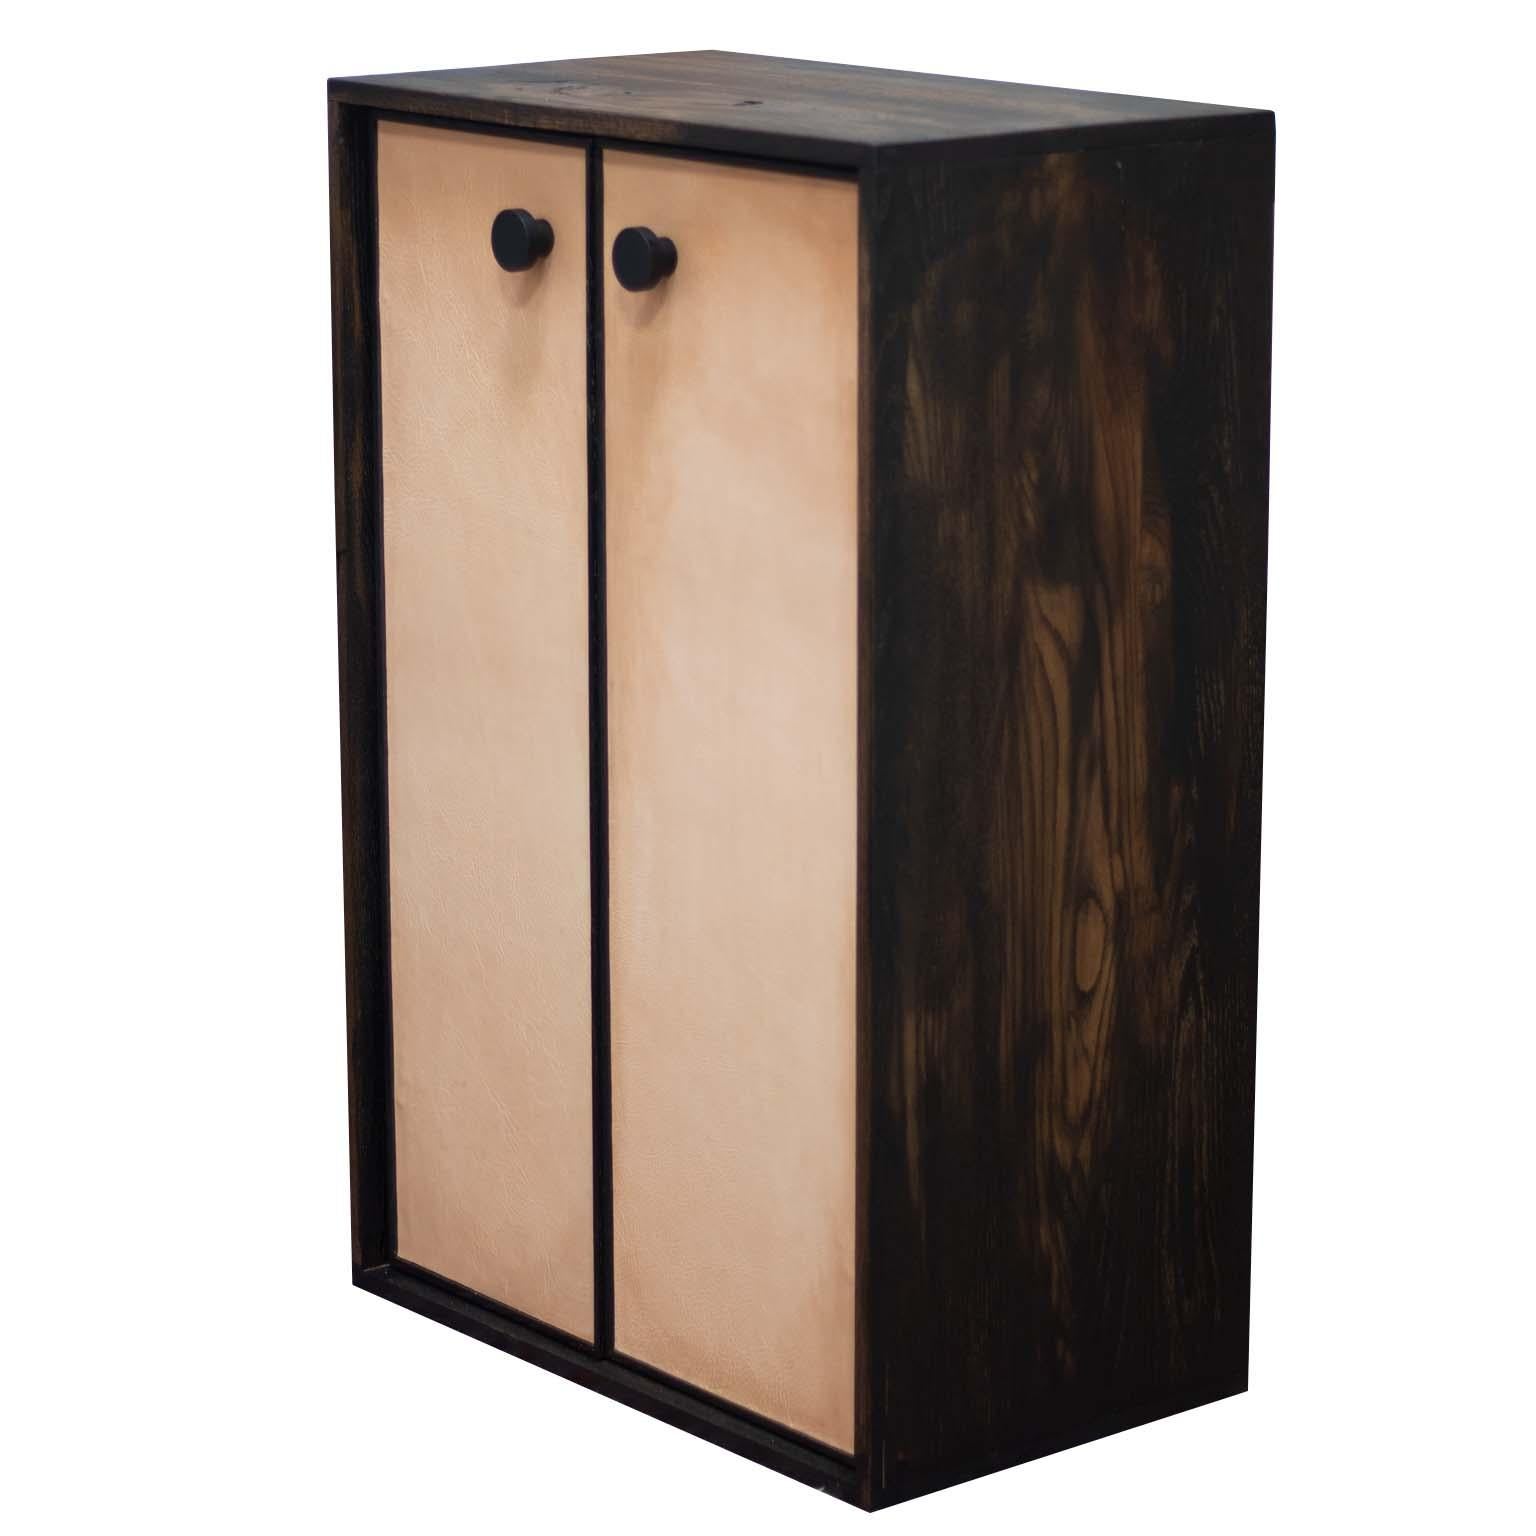 This Kawakami cabinet features a faux antique finish on distressed solid oak with beautiful natural leather doors and cabinet handles from Bacman and Berglund.

This cabinet is not short on fine details, such as an inner solid walnut frame